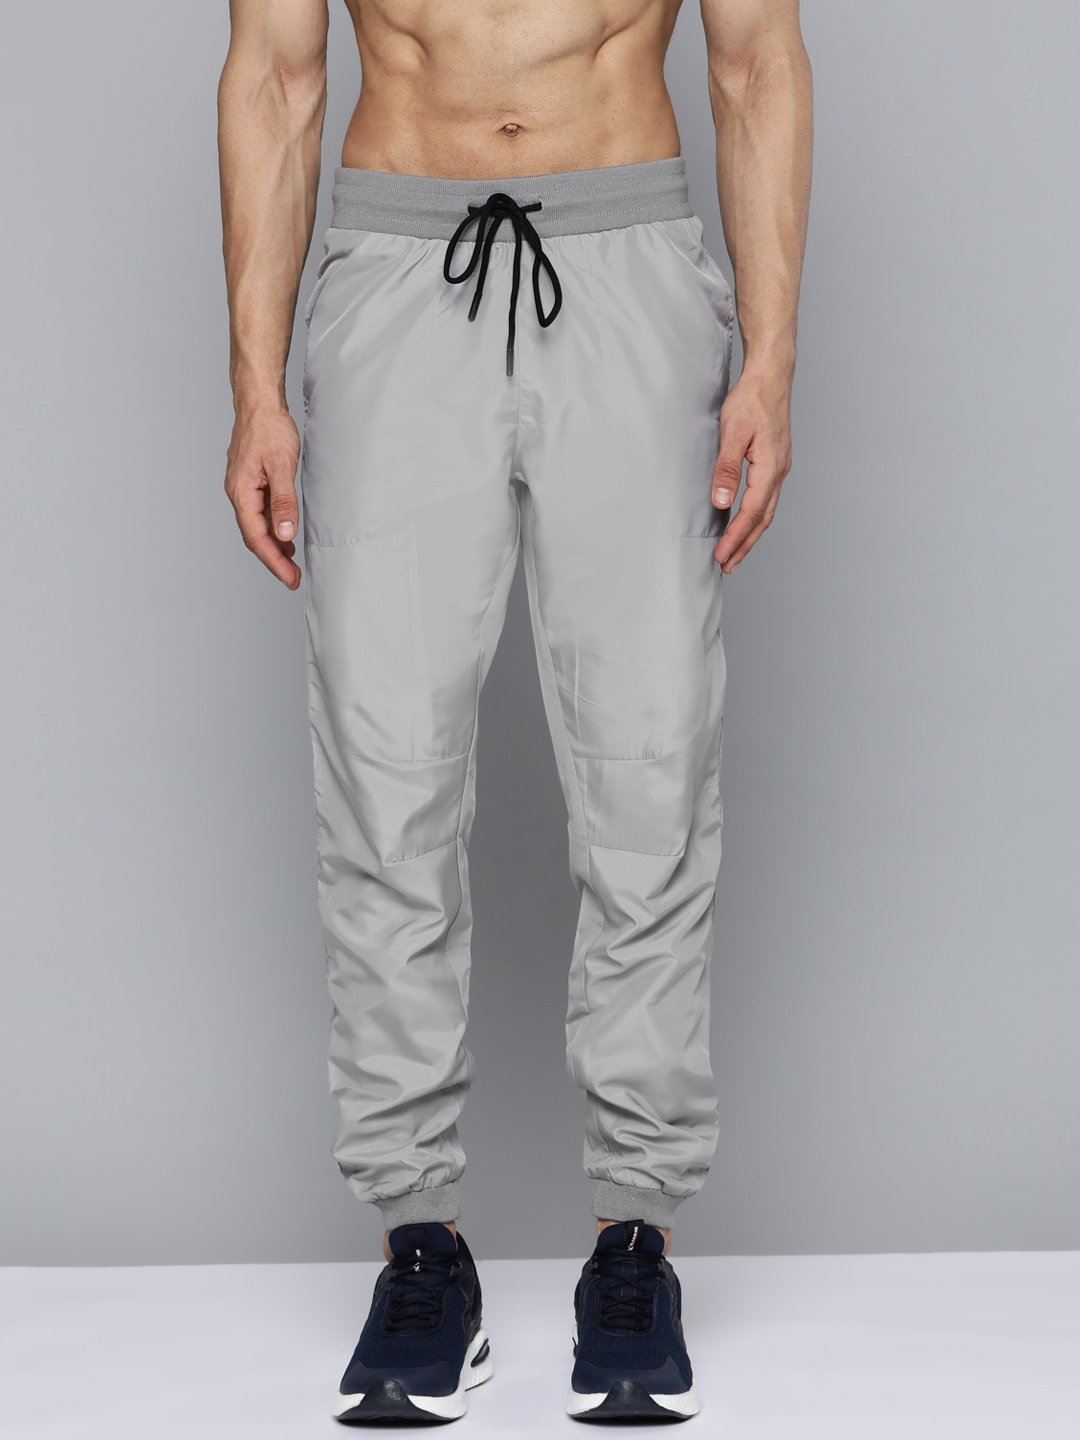 Buy HRX Trousers online - Men - 445 products | FASHIOLA.in